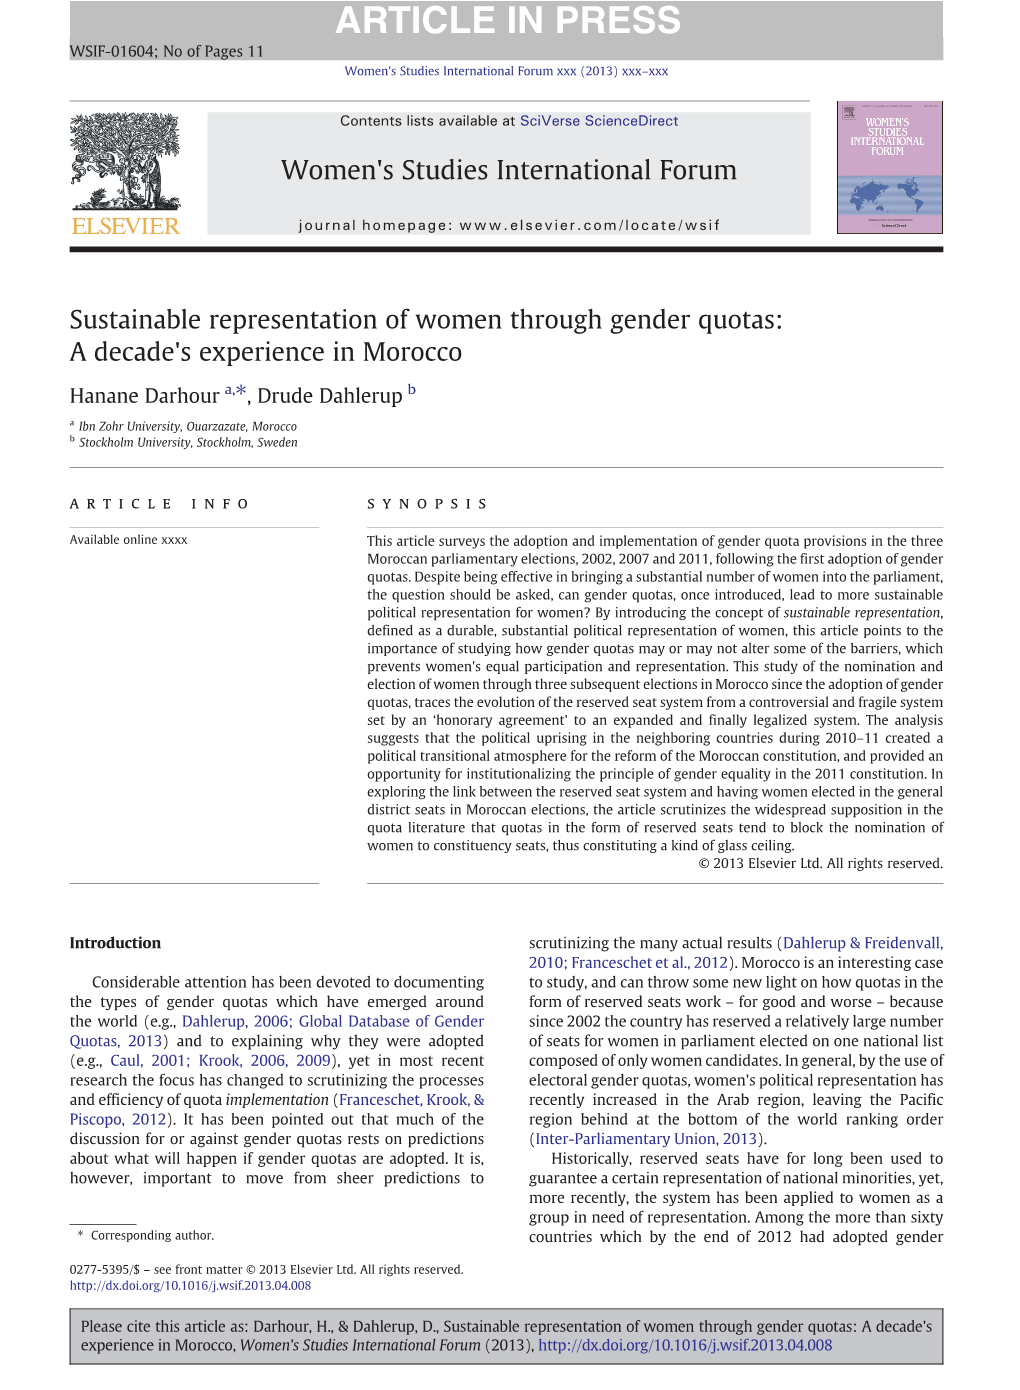 Sustainable Representation of Women Through Gender Quotas: a Decade's Experience in Morocco